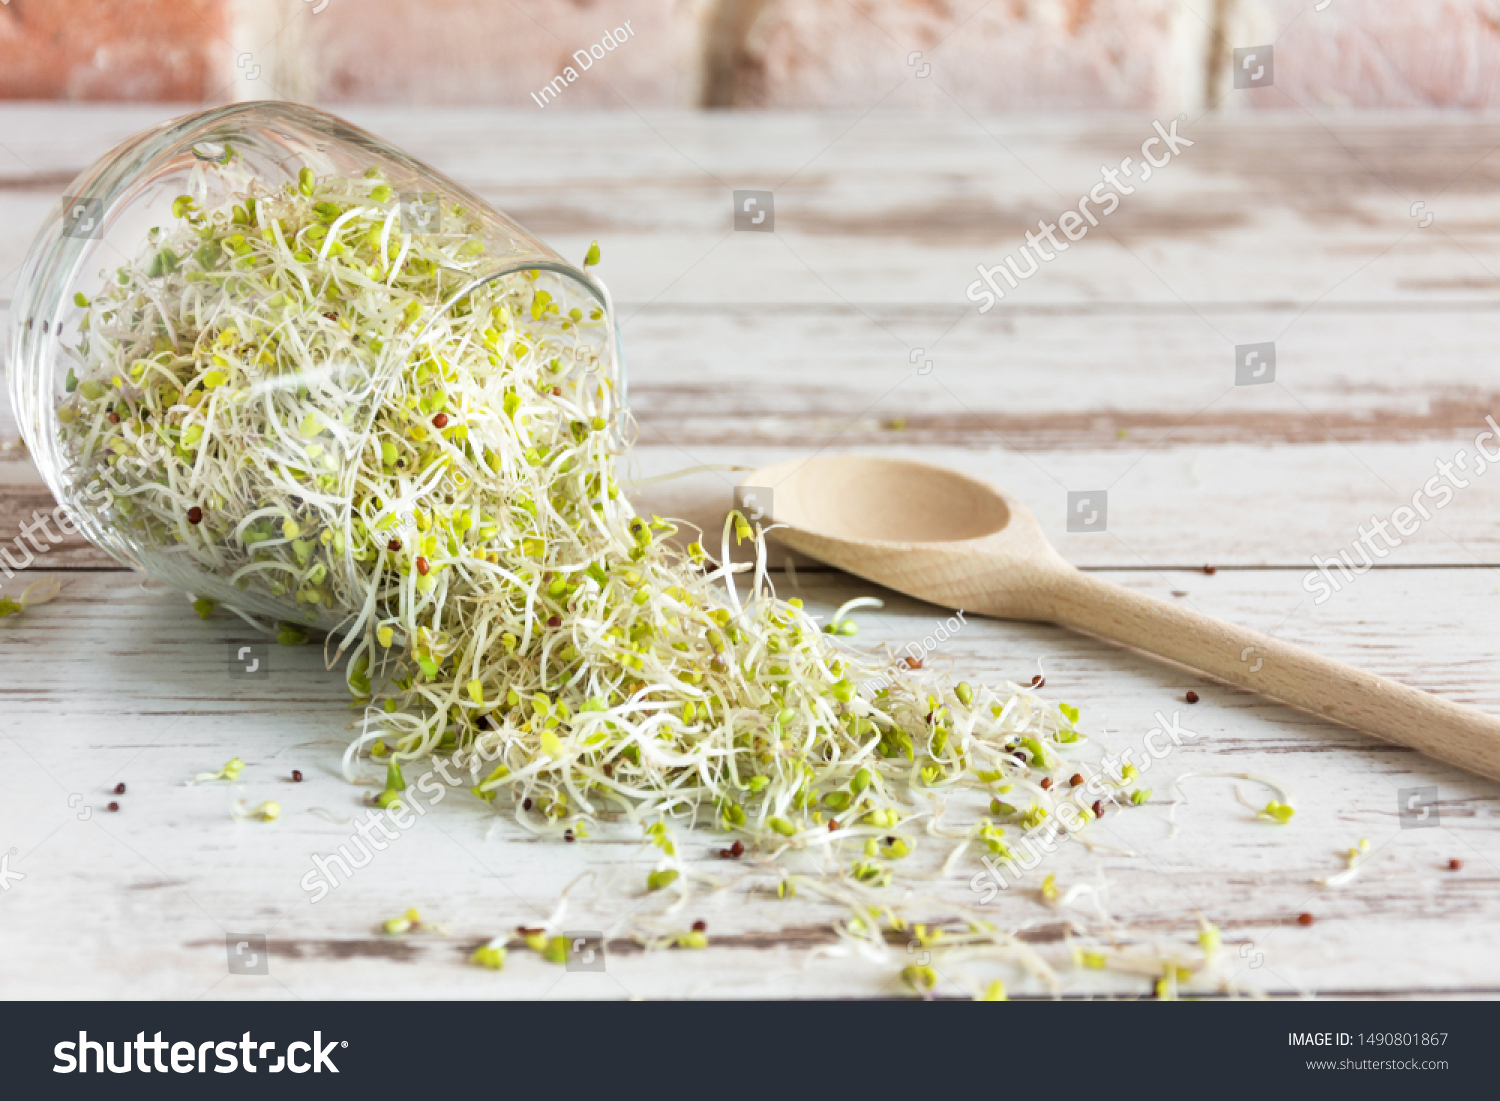 Mix of various sprouts on wooden background. Sprouted seeds. Healthy eating concept. #1490801867